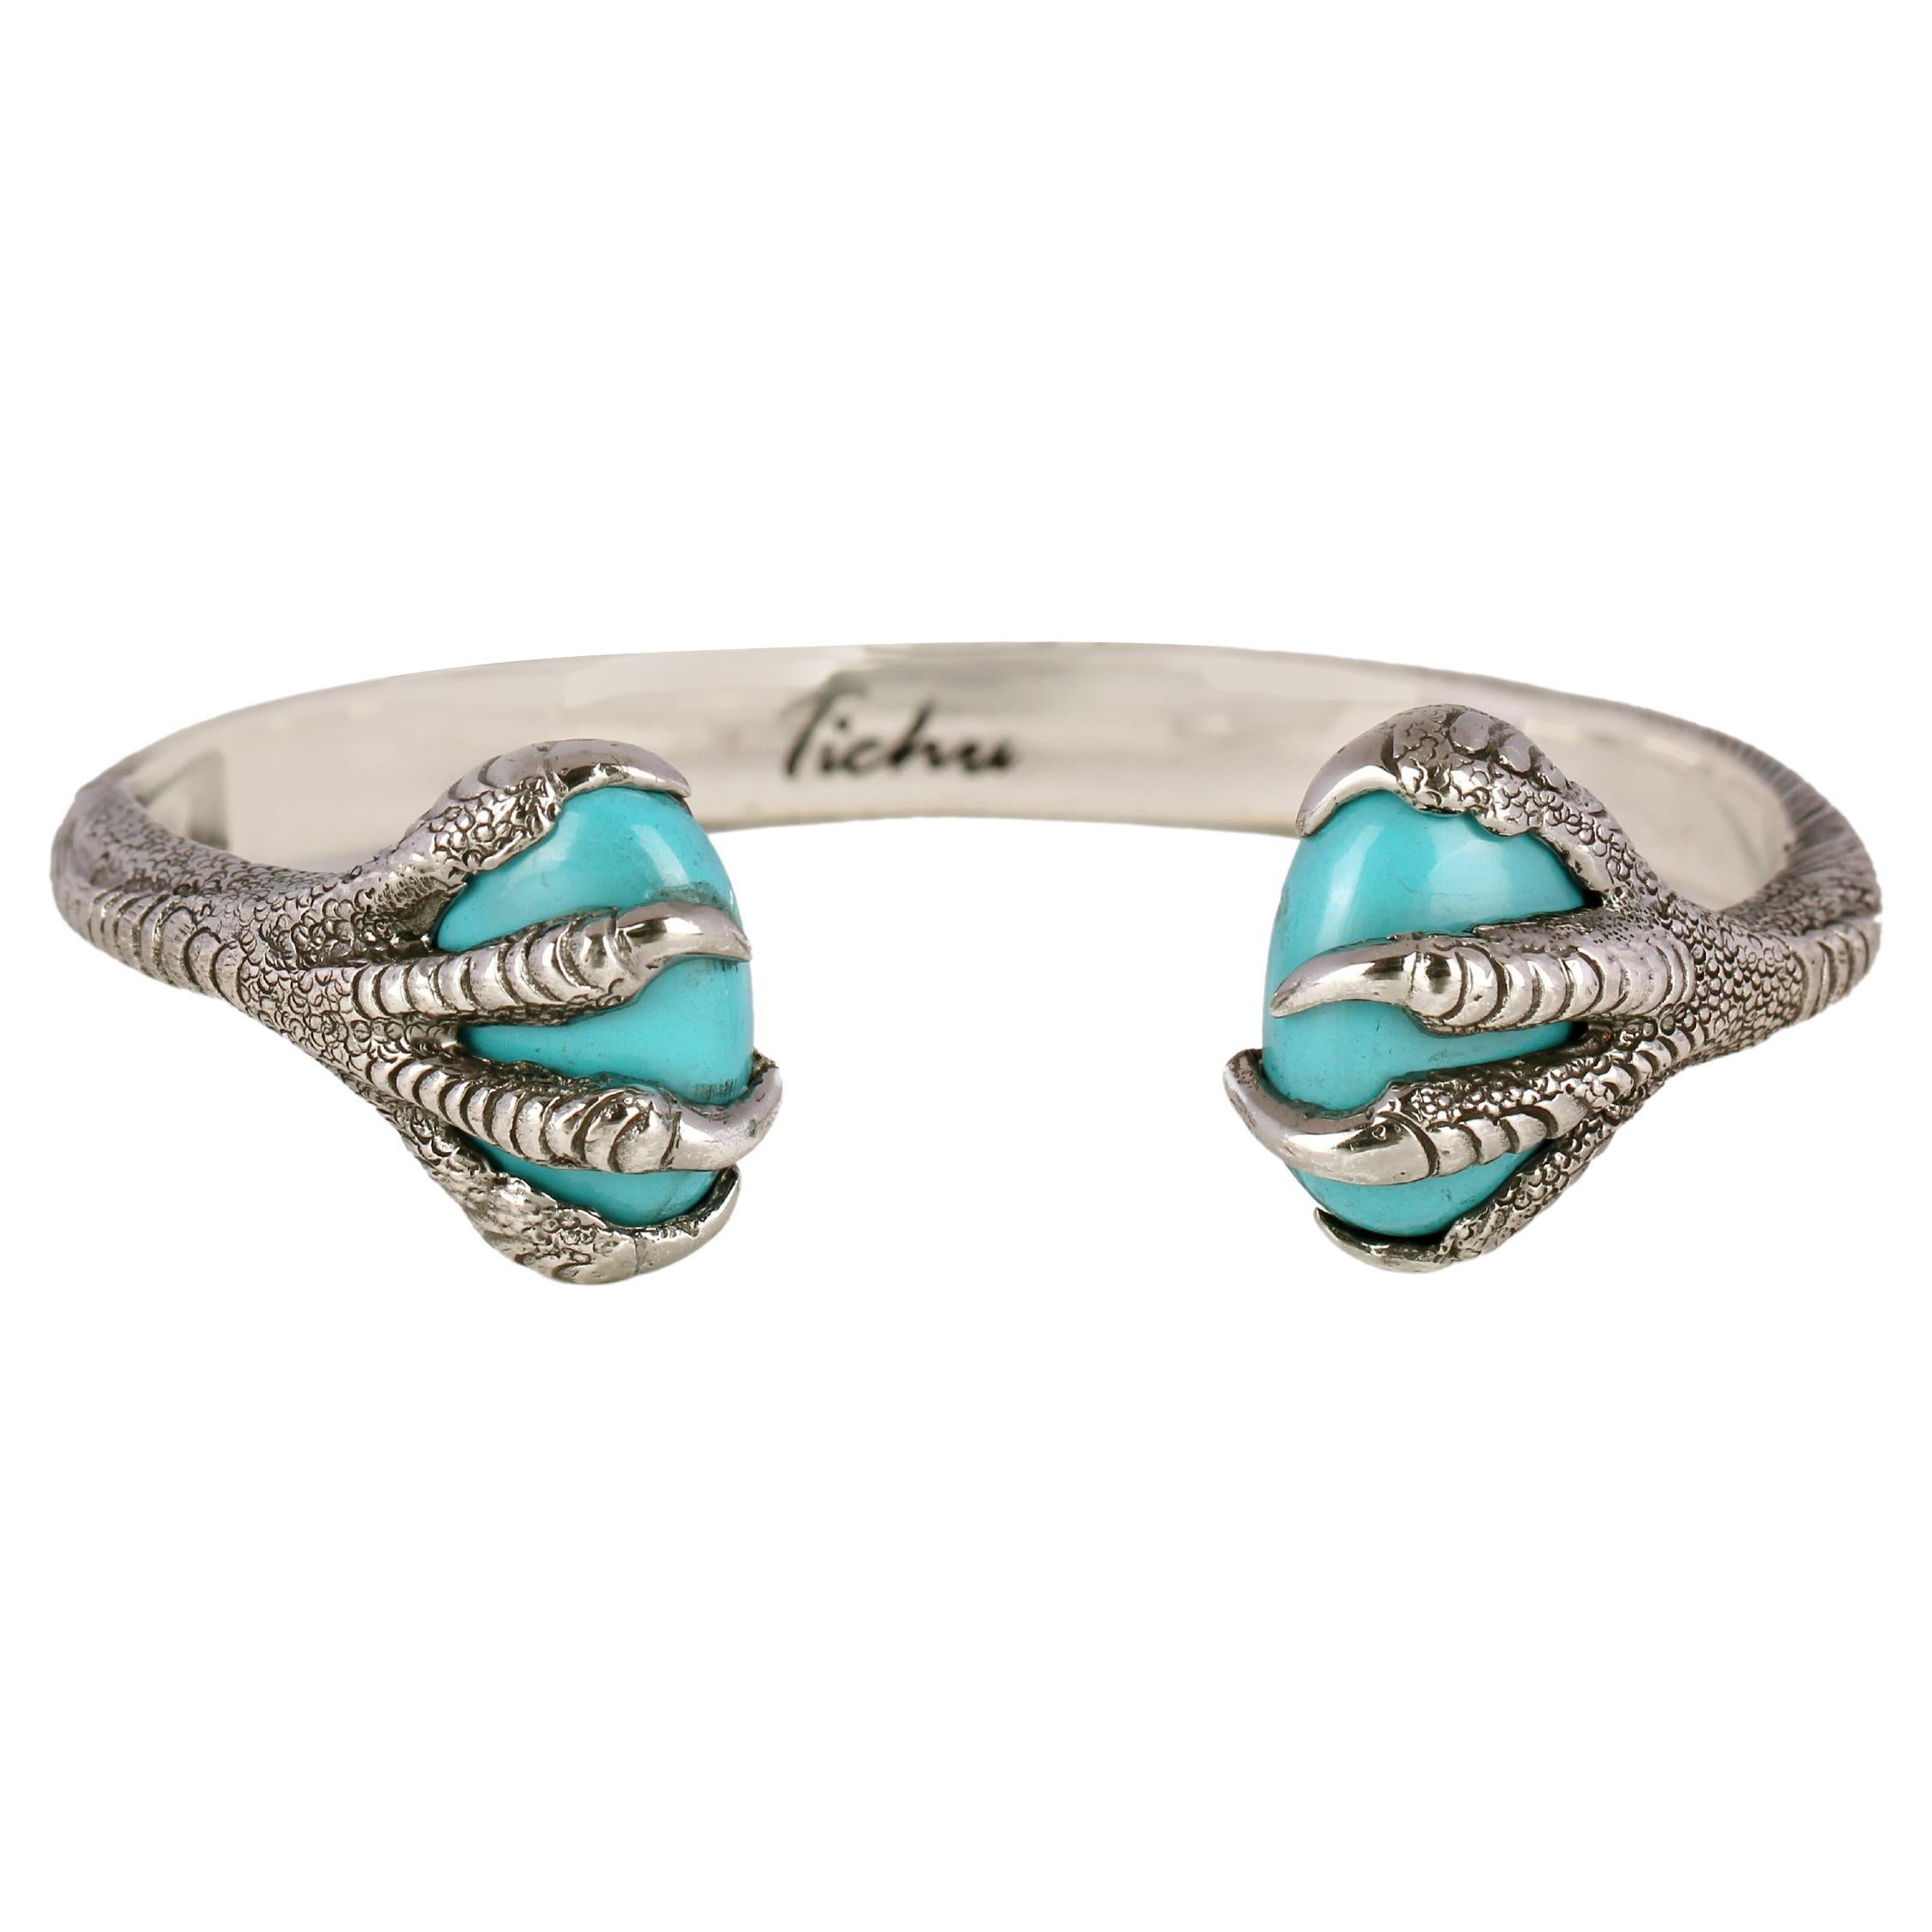 Tichu Turquoise Eagle Claw Cuff in Silver Sterling & Crystal Quartz, Size 'L' For Sale